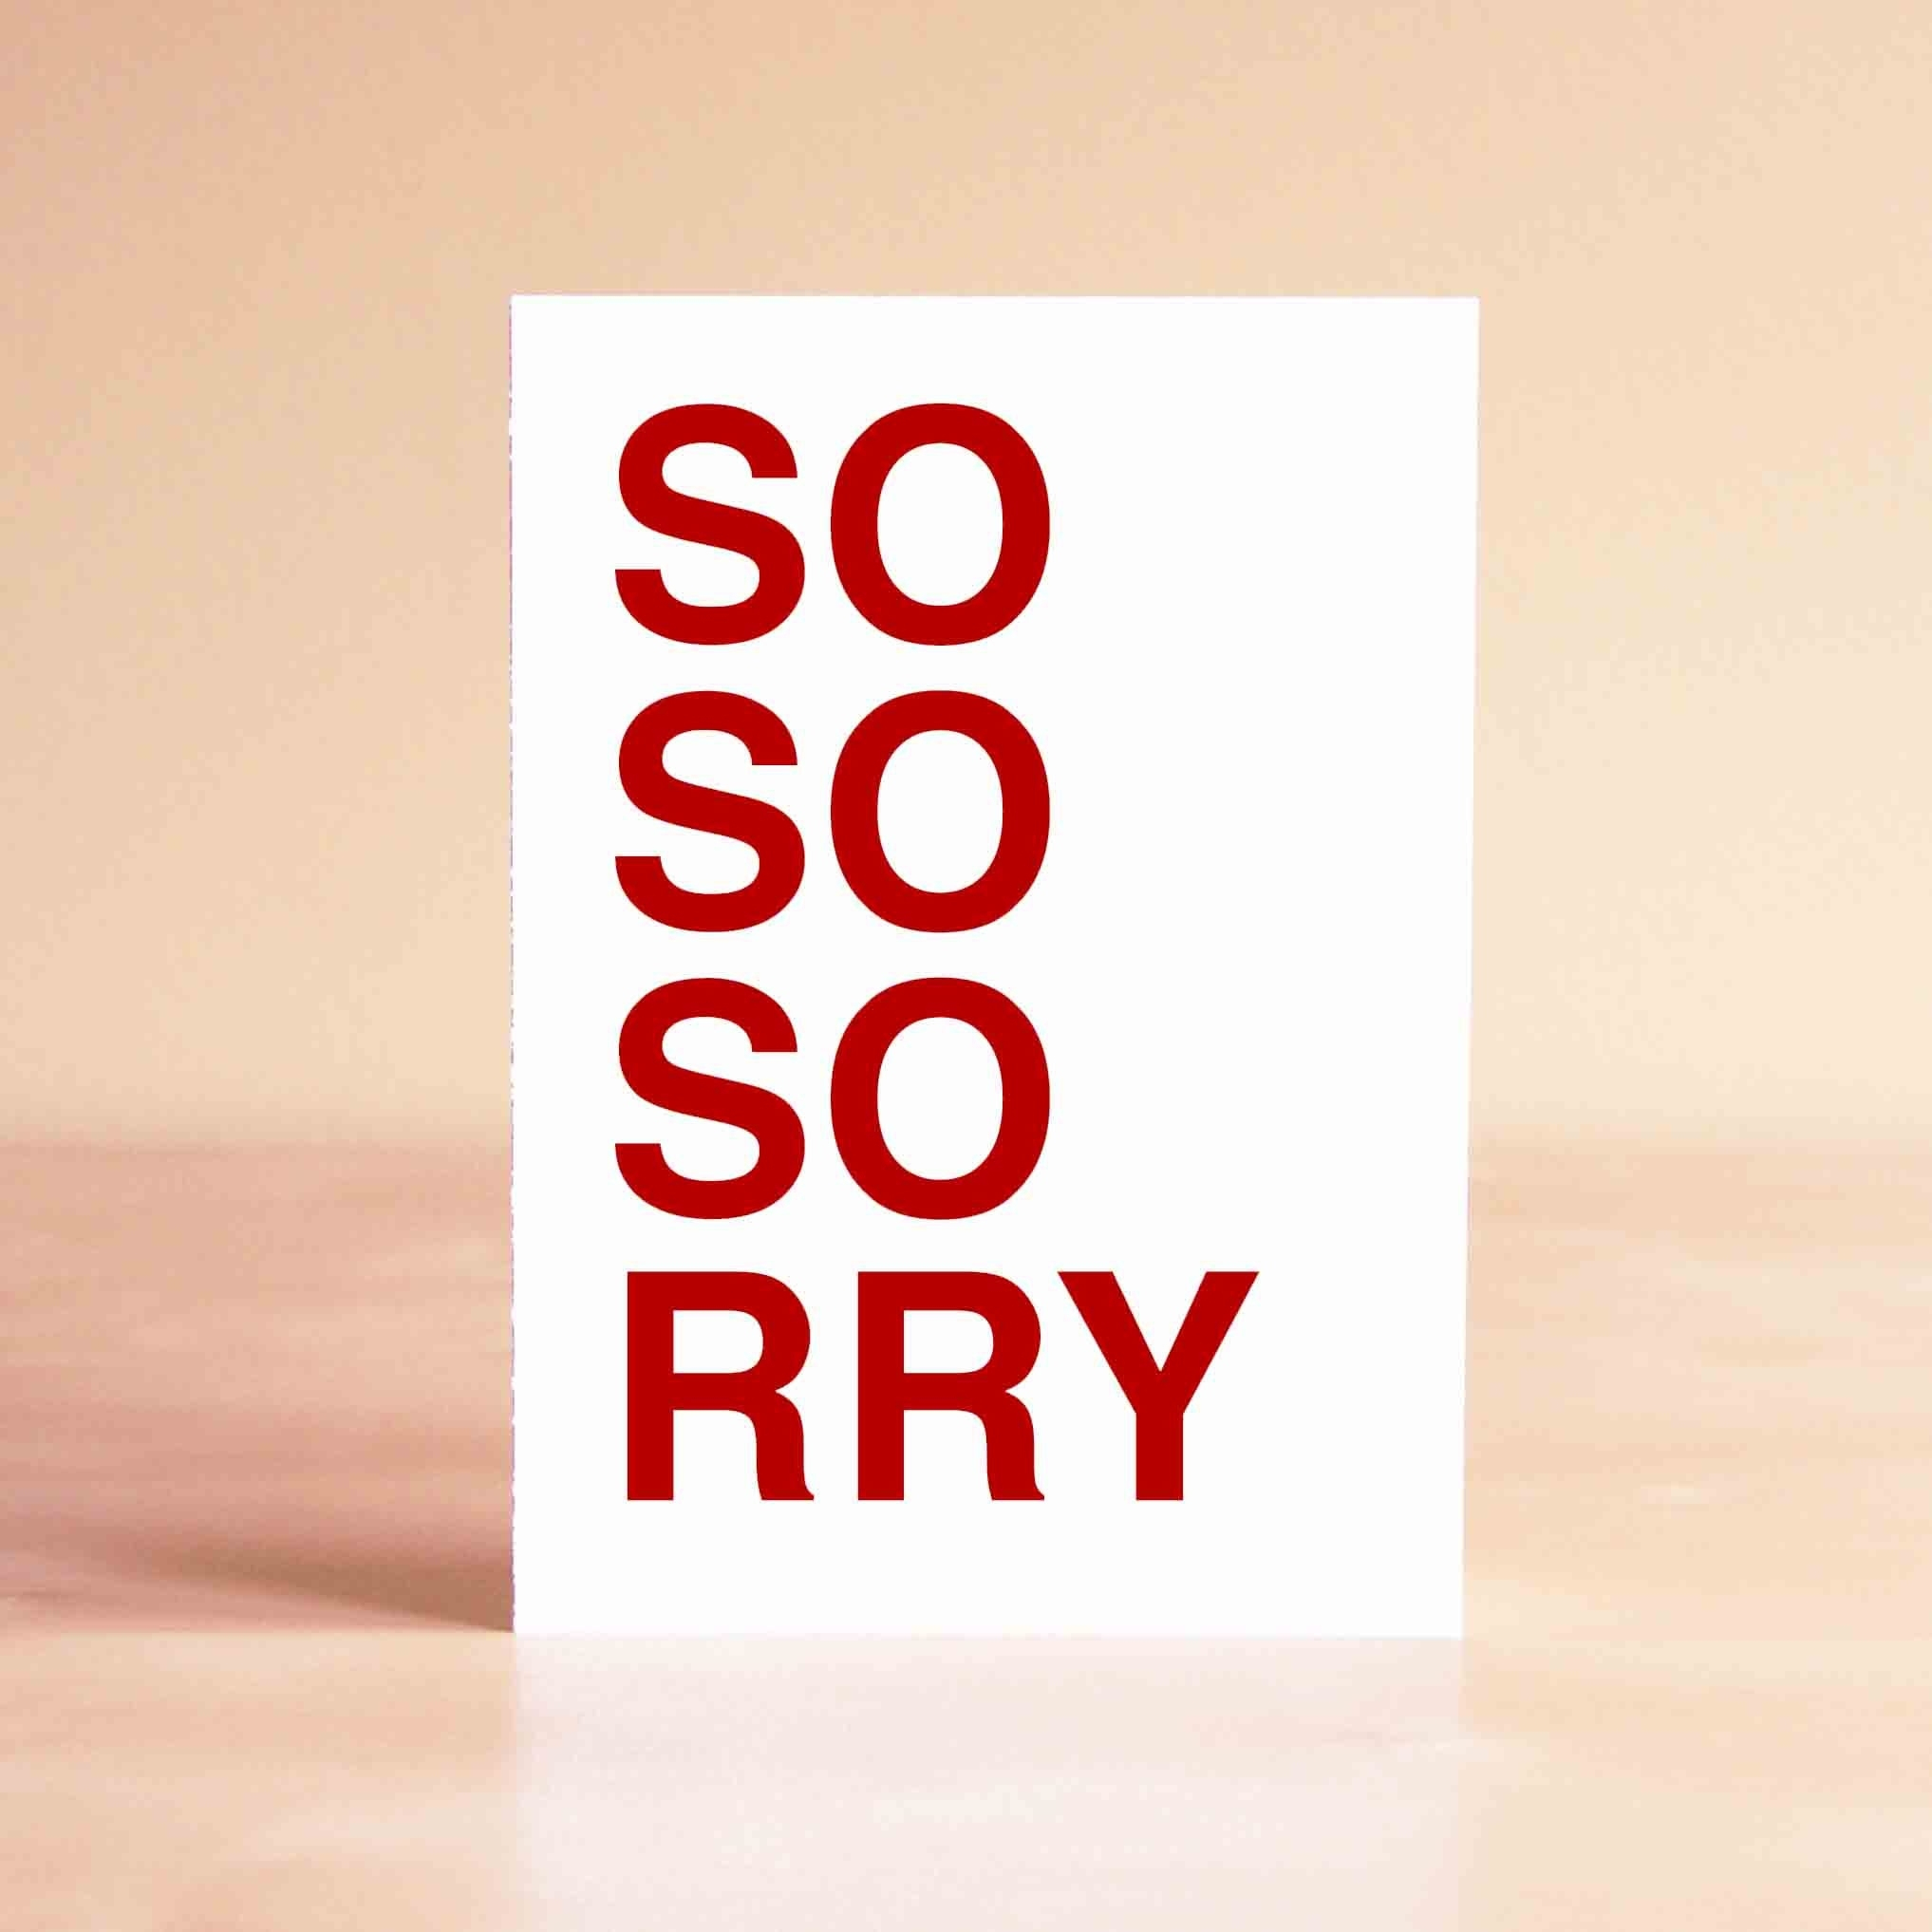 Sorry For Being Rubbish Image I Am Cards, I&amp;#039;m Sorry,  Free - Free Printable Apology Cards